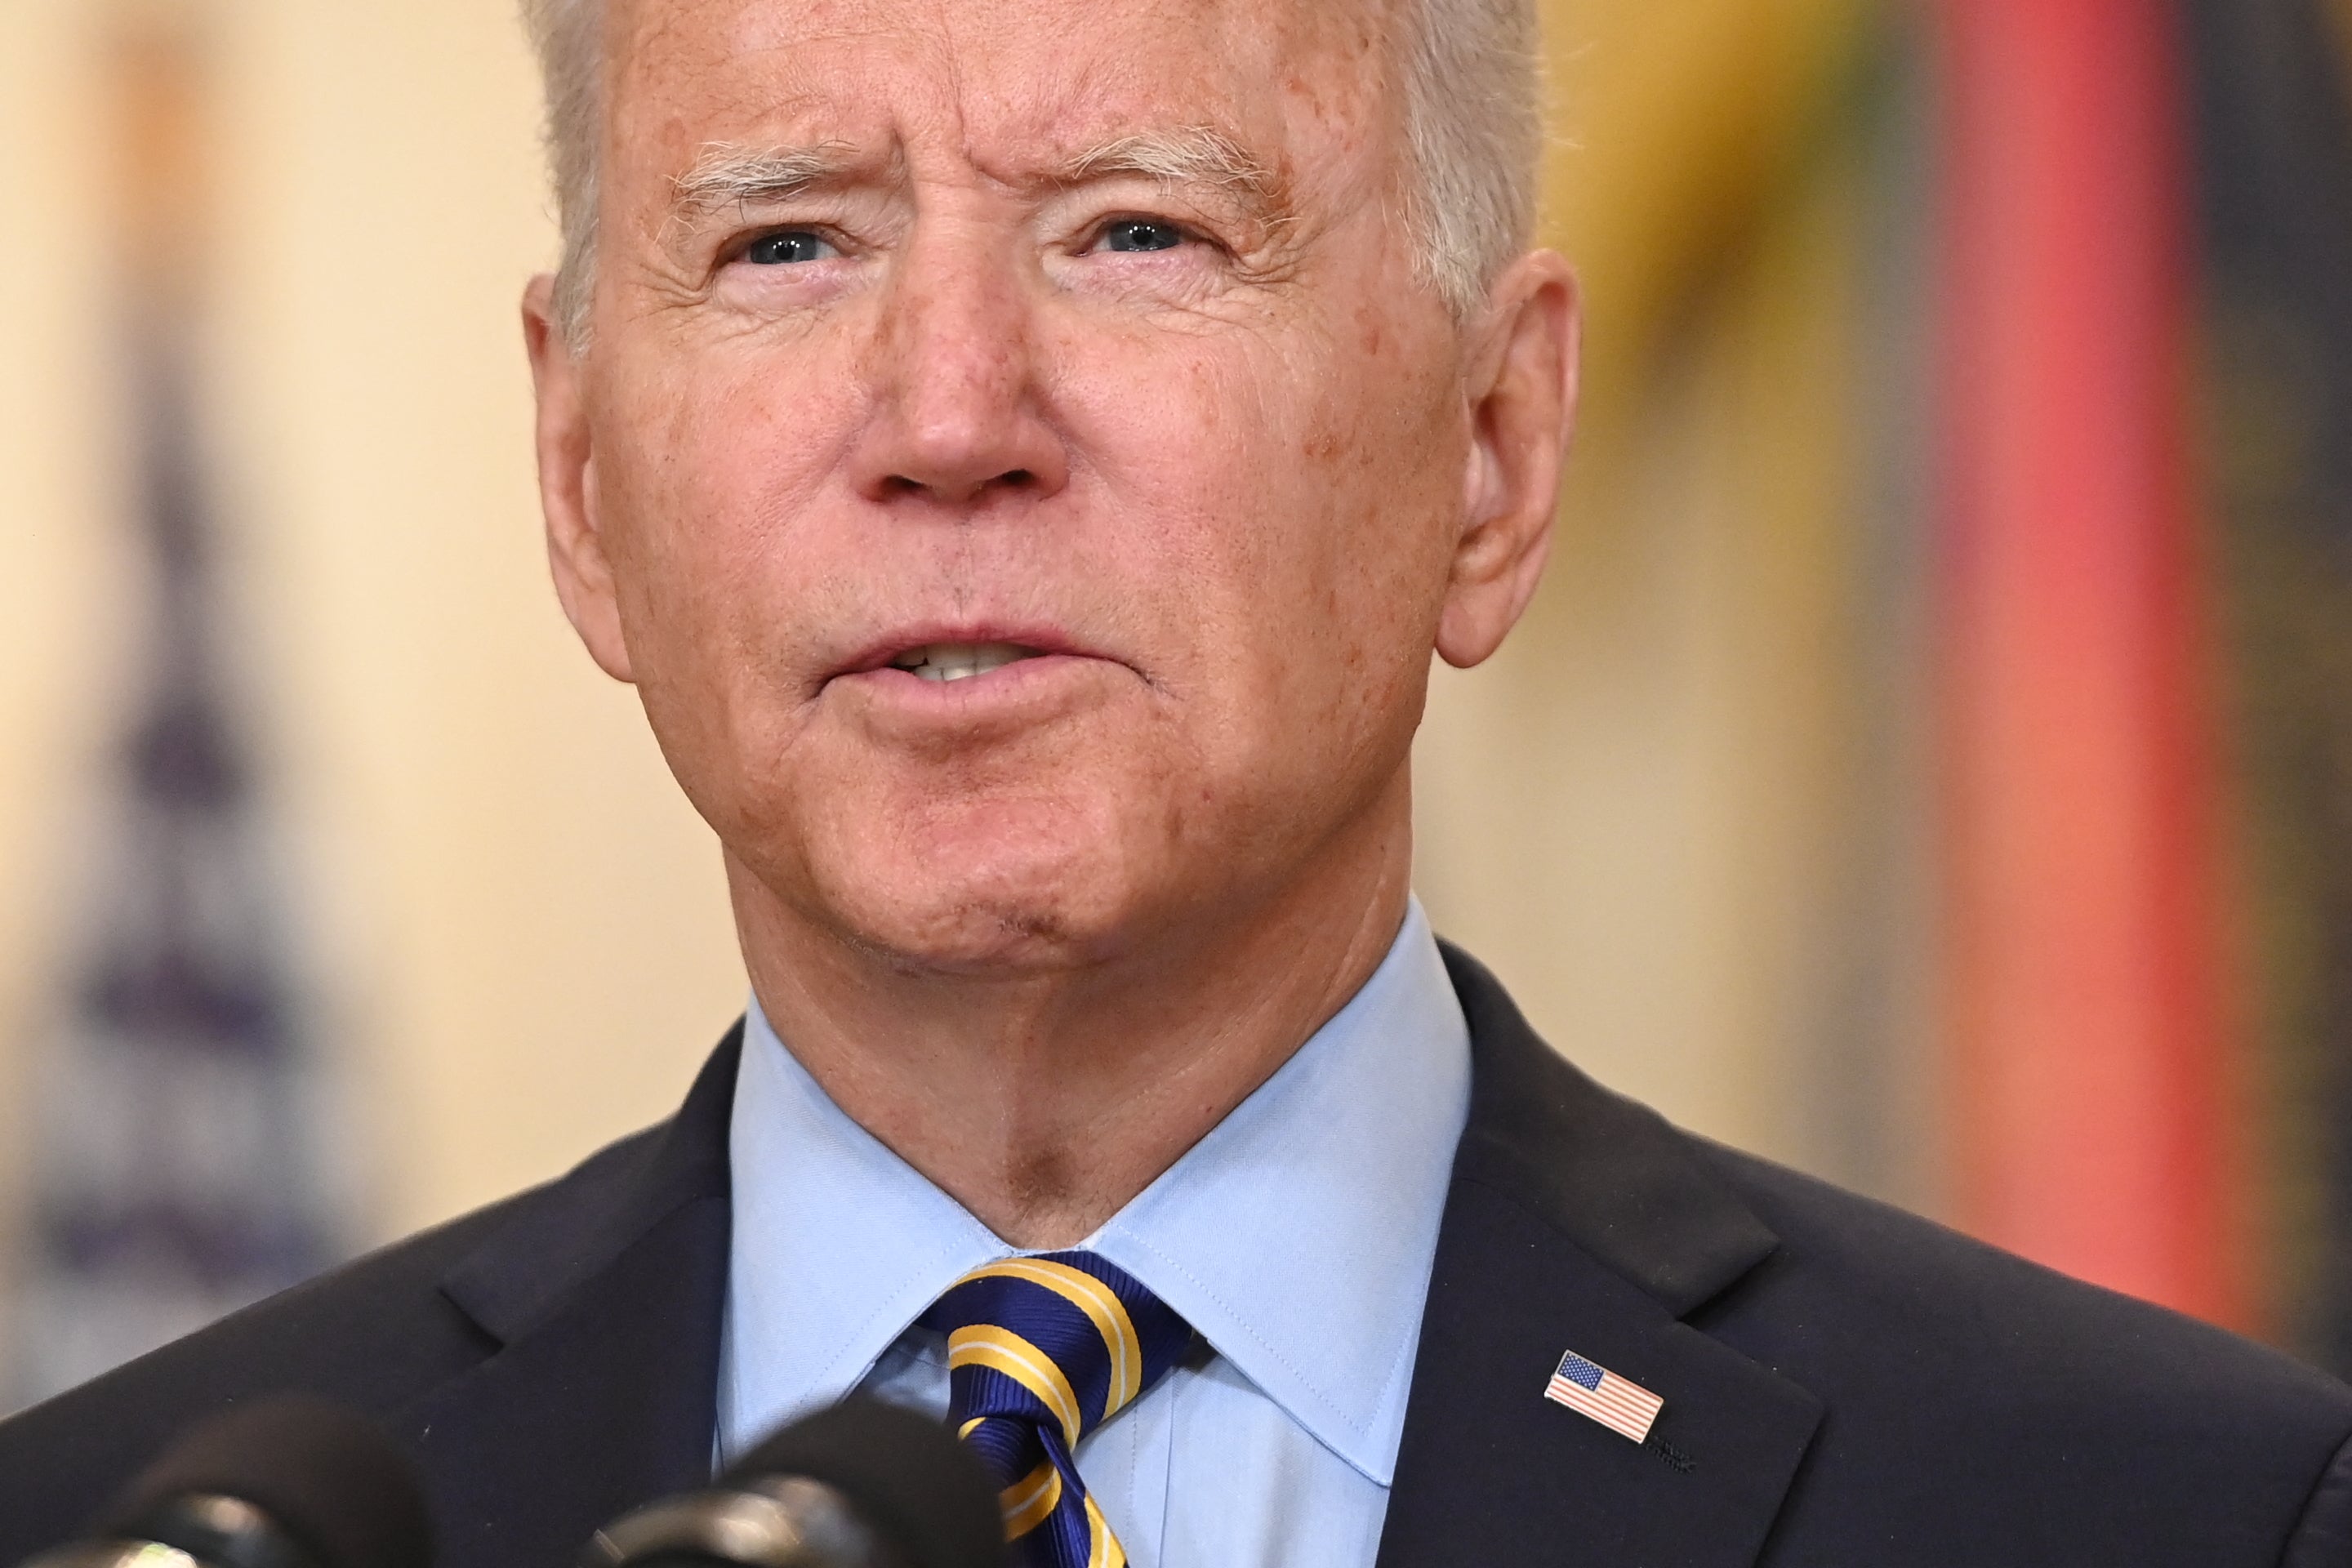 Biden said the war had now crossed into two generations